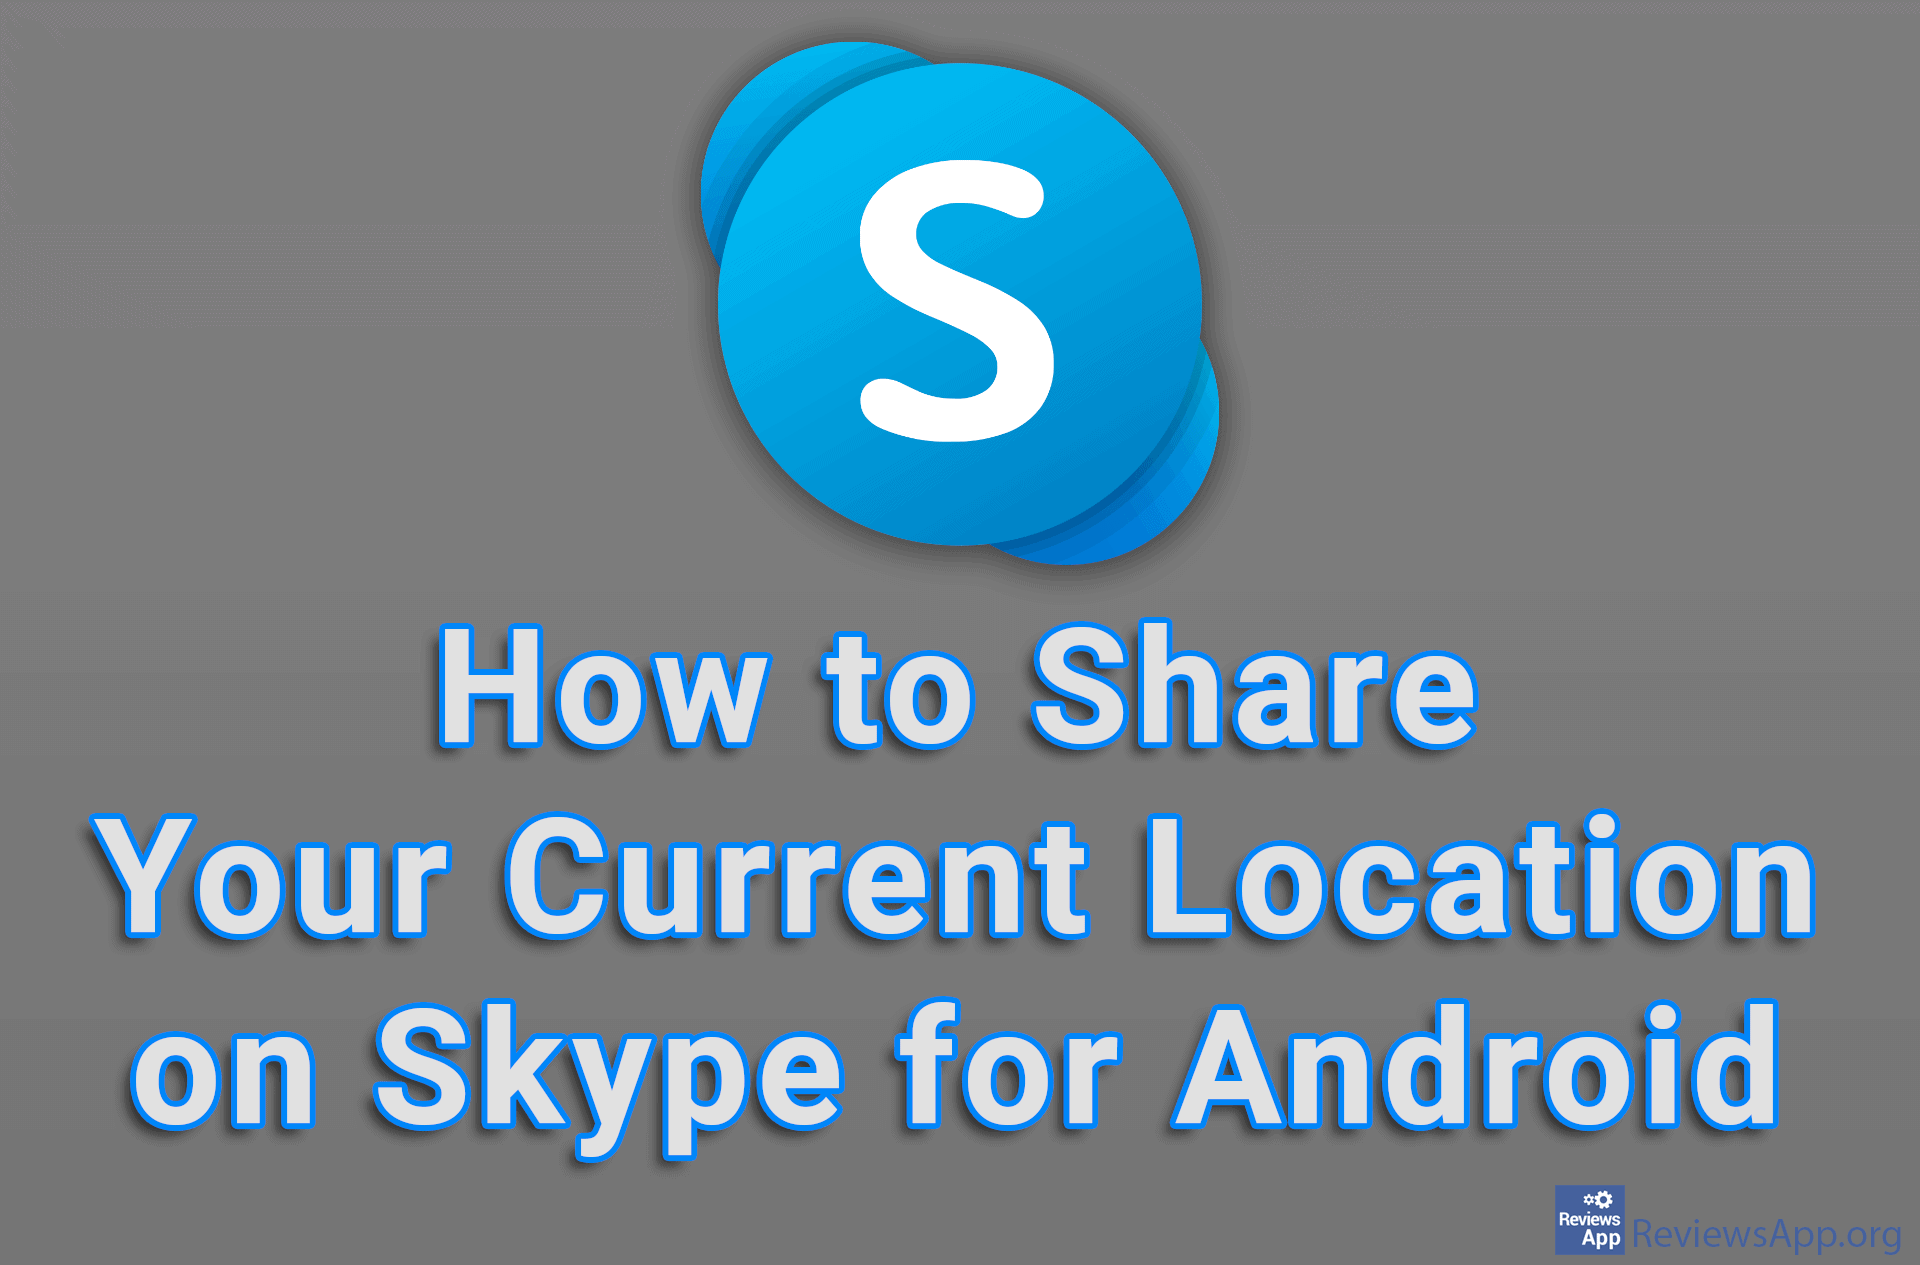 How to Share Your Current Location on Skype for Android